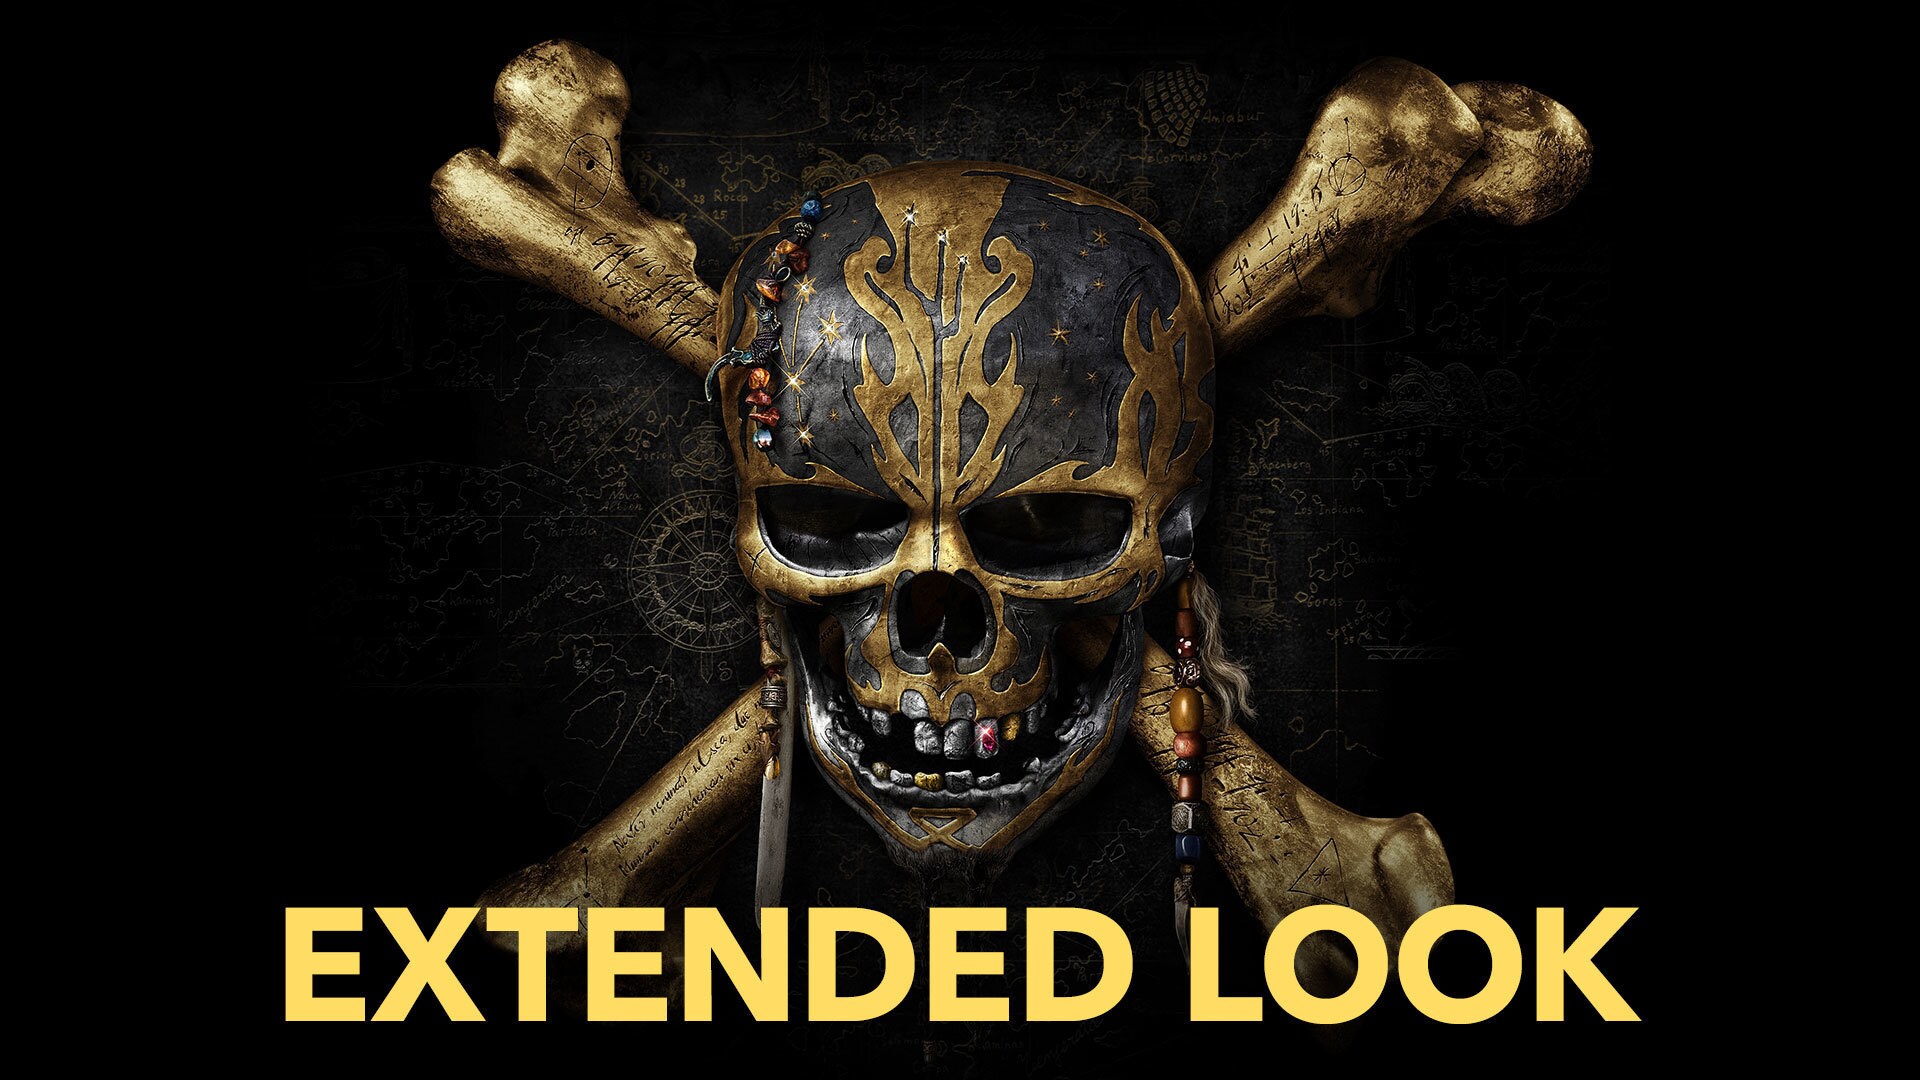 Pirates of the Caribbean: Dead Men Tell No Tales - Extended Look